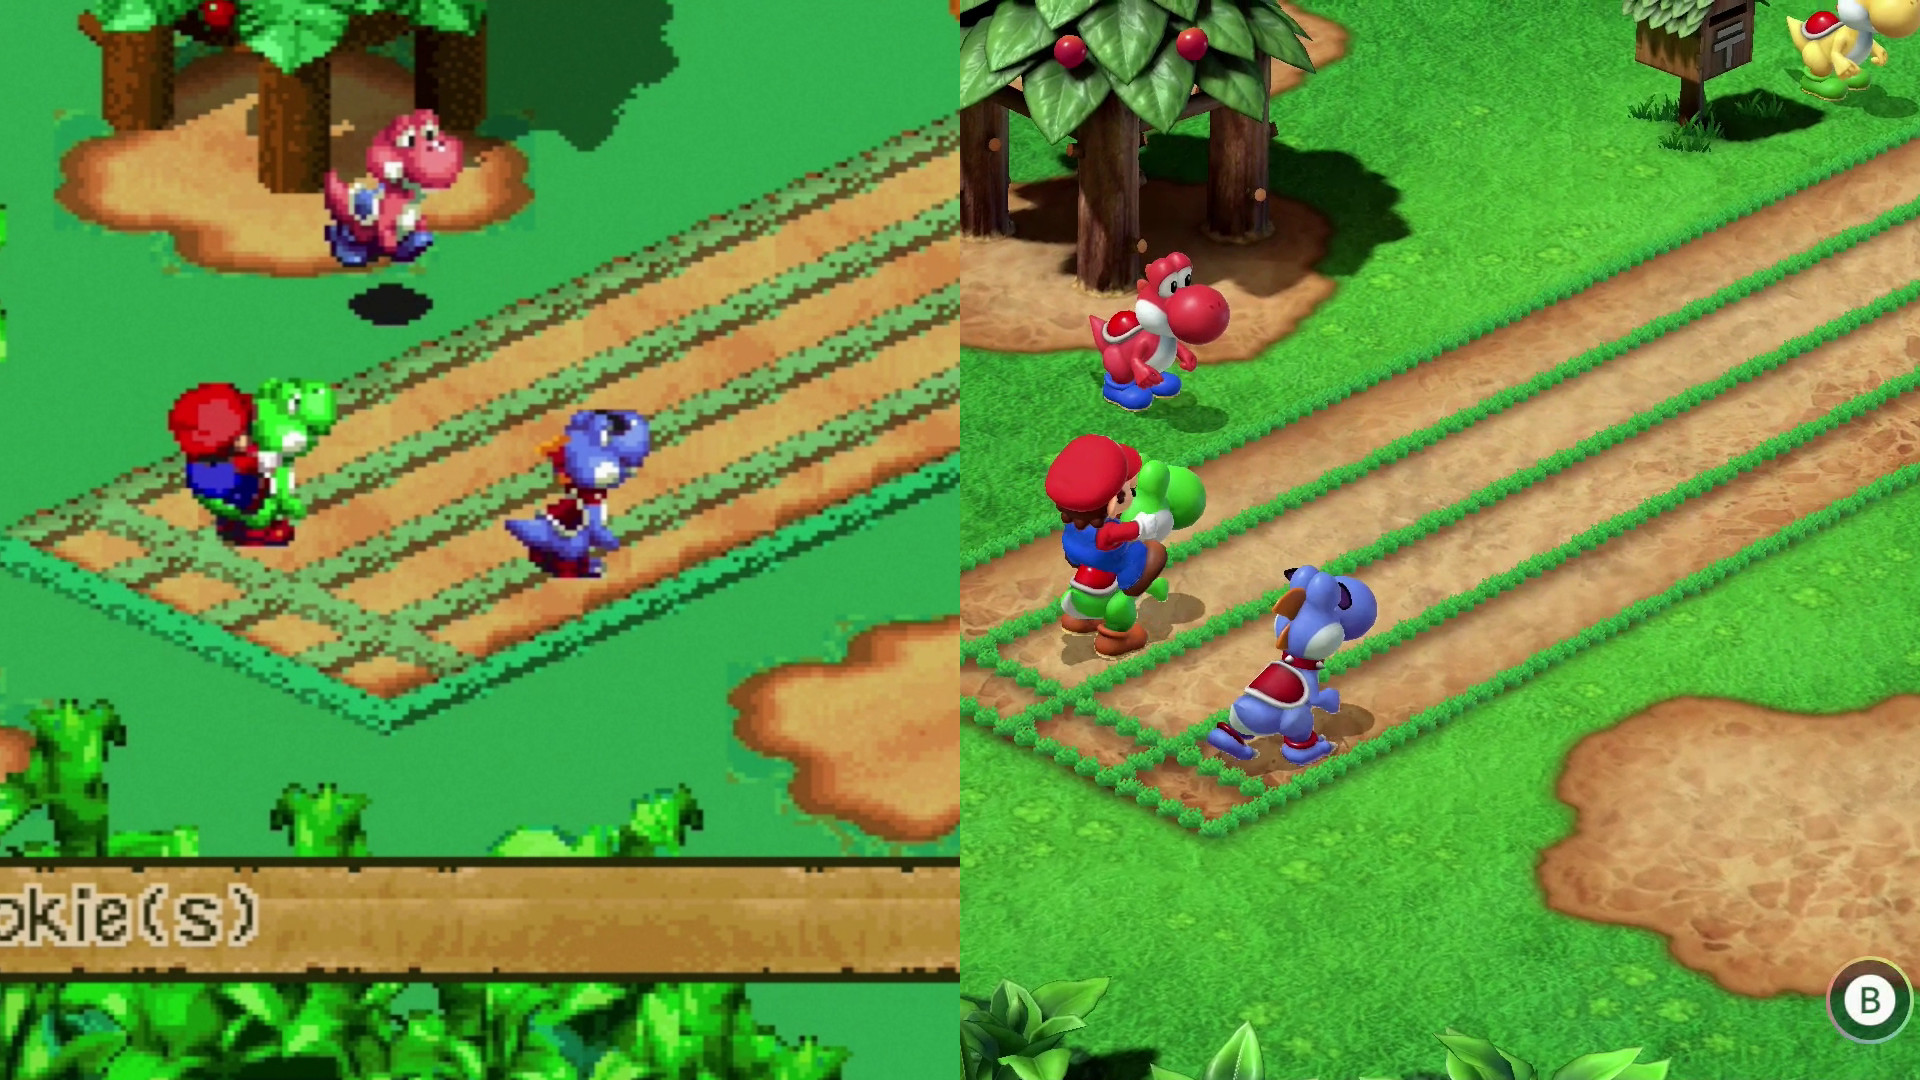 The Super Mario RPG remake is absolutely faithful to the original Mario  JRPG in every way, except the ways that are better left in the '90s